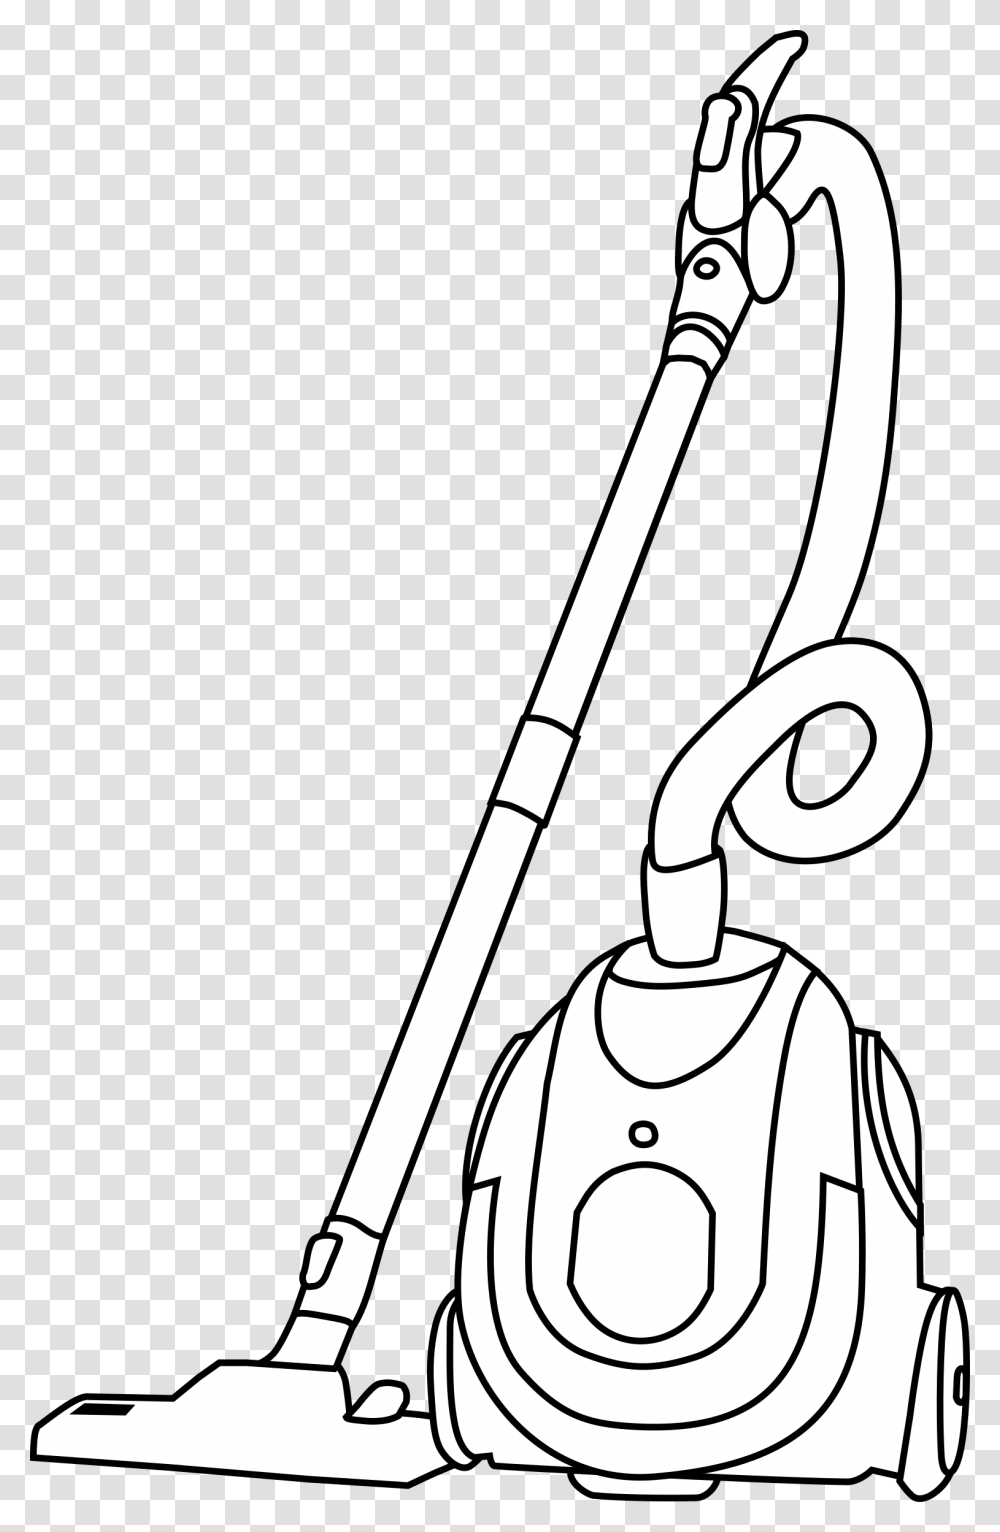 Cleaner Drawing At Getdrawings Vacuum Cleaner Clipart Black And White, Shovel, Tool, Lawn Mower, Brush Transparent Png